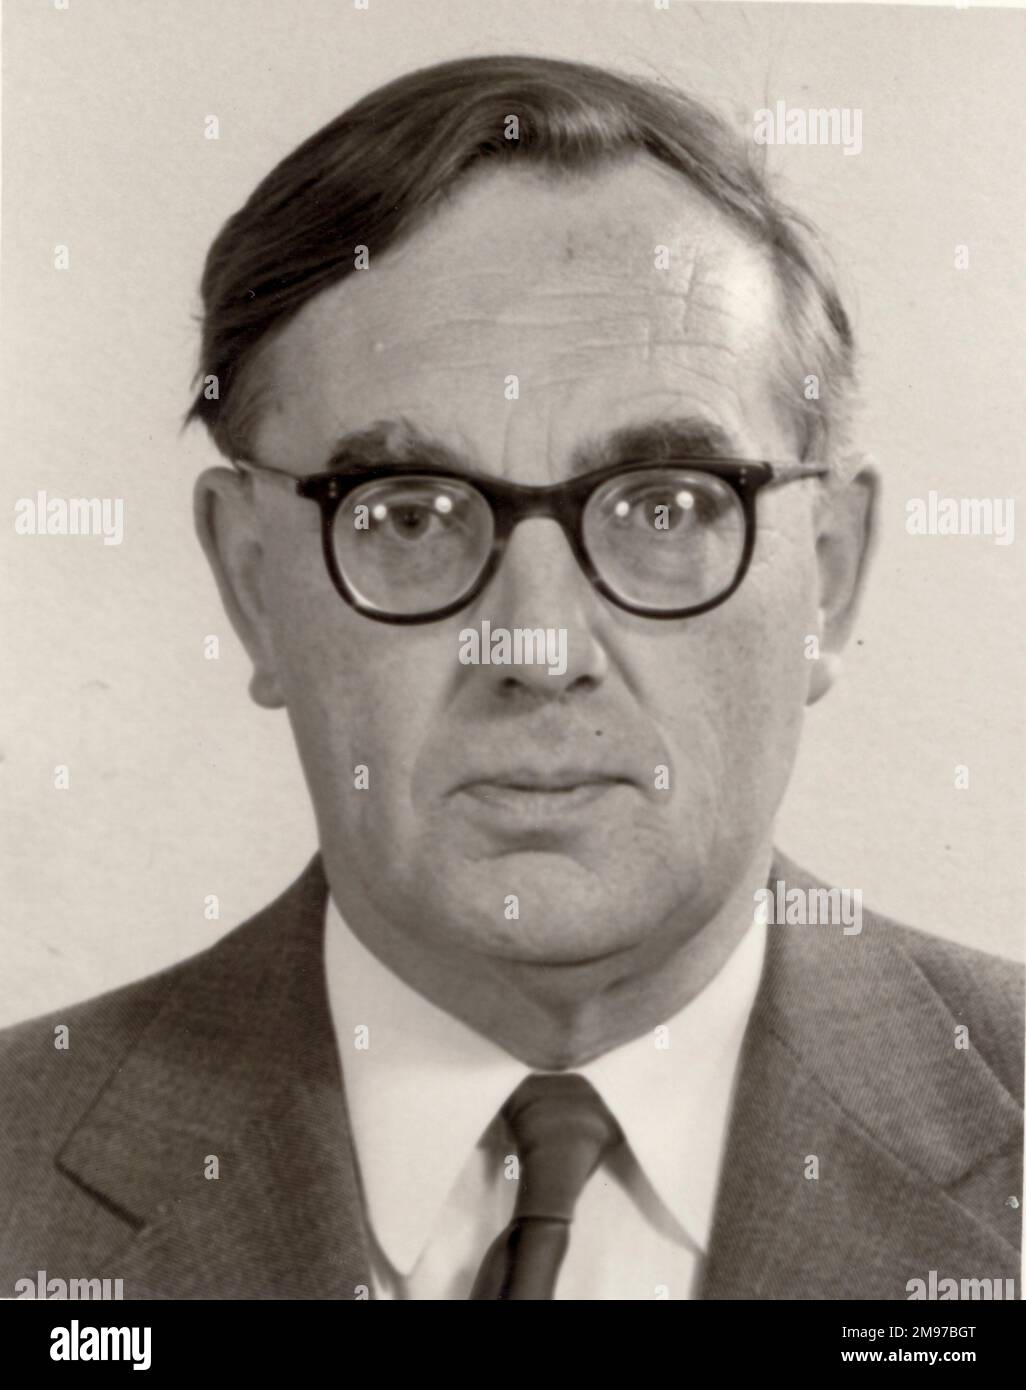 Dr Eric William Evan Rogers, CEng, FRAeS, 1925-2004. Stock Photo